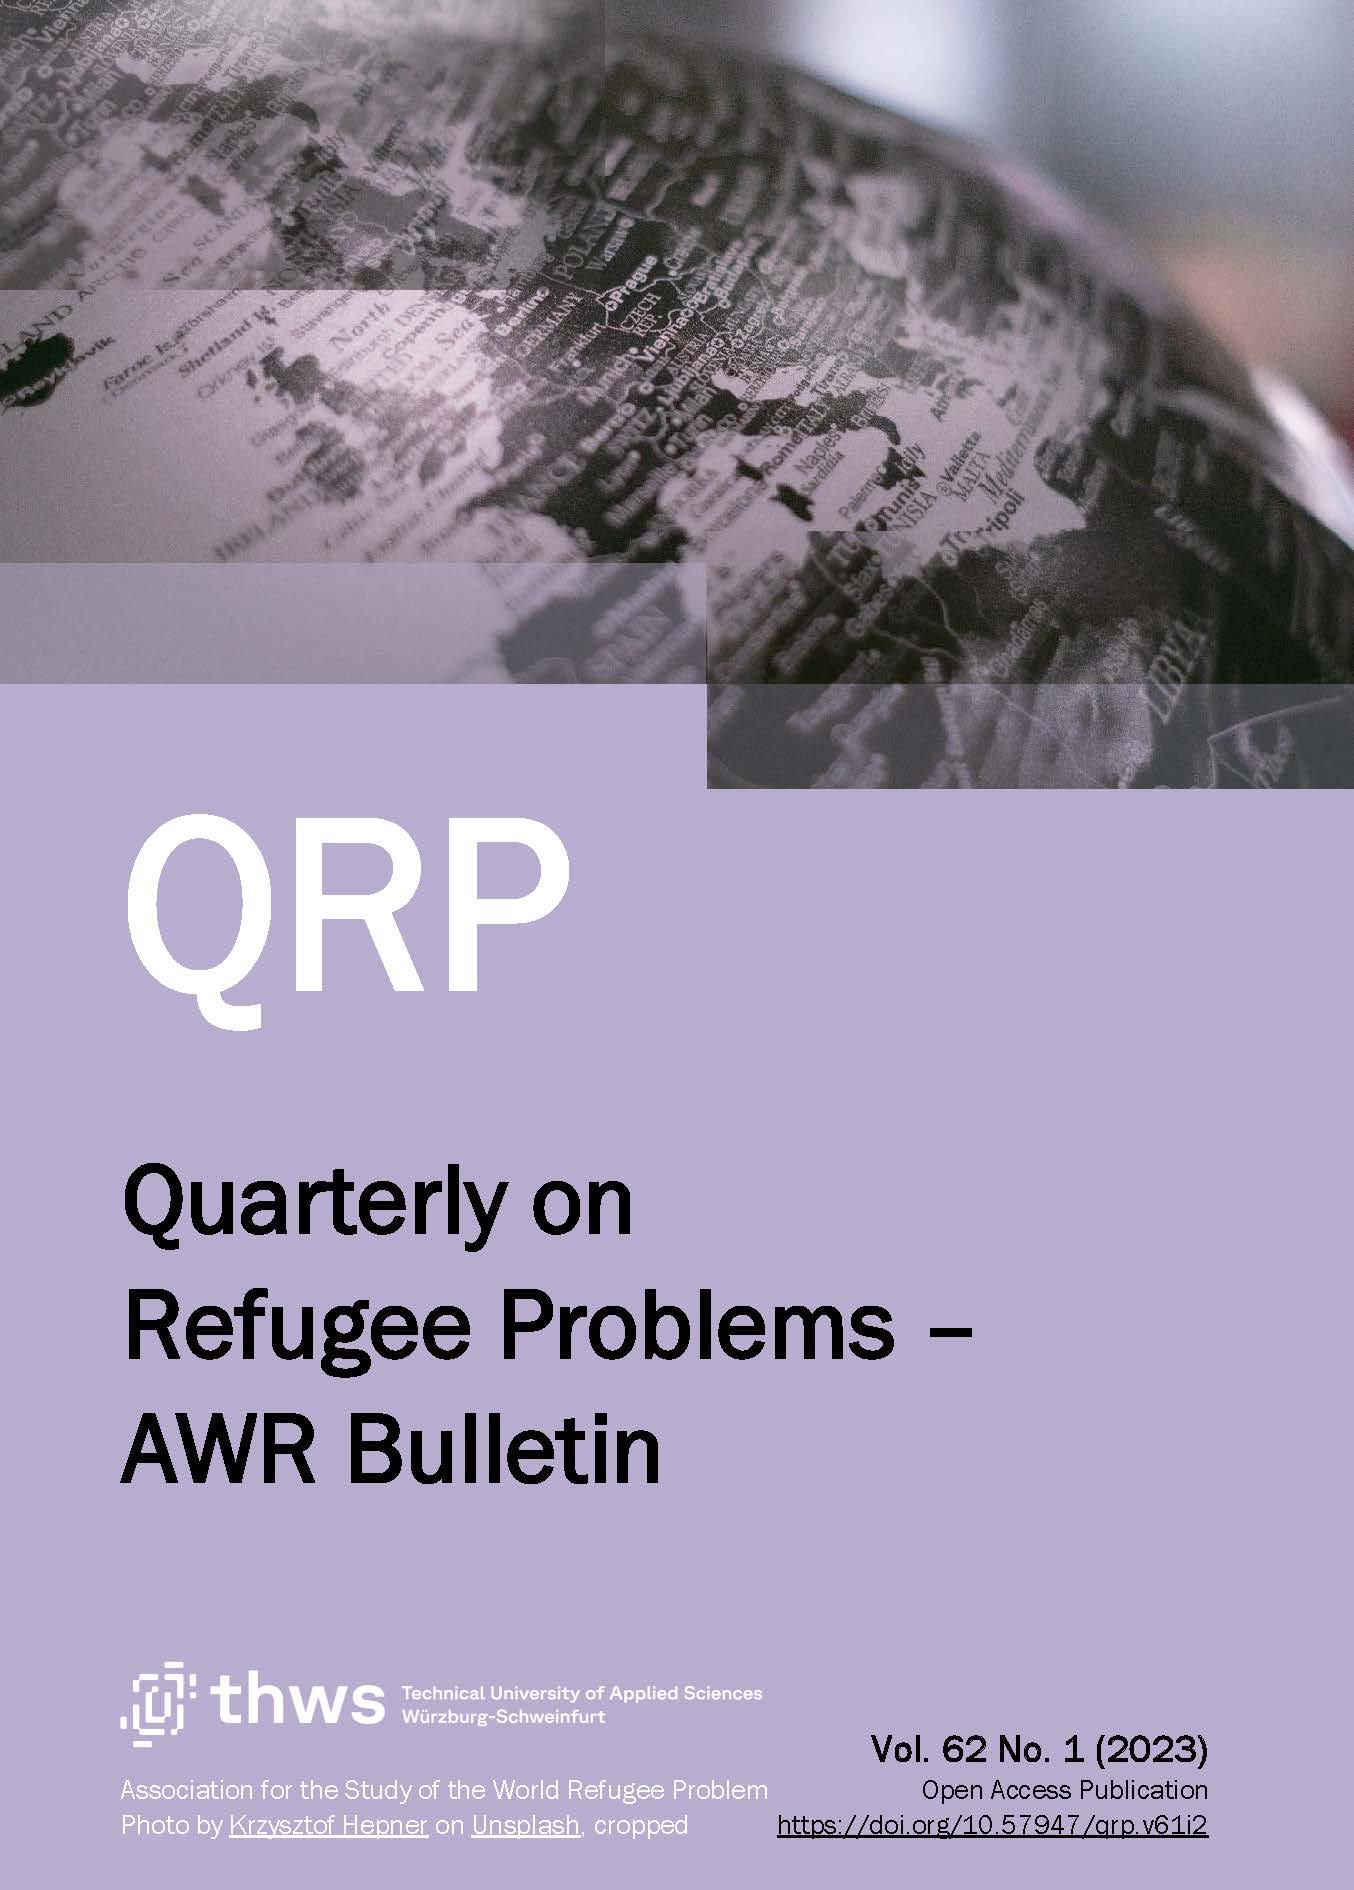 The cover of the 2023, volume 62, first issue of the Quarterly on Refugee Problems - AWR Bulletin